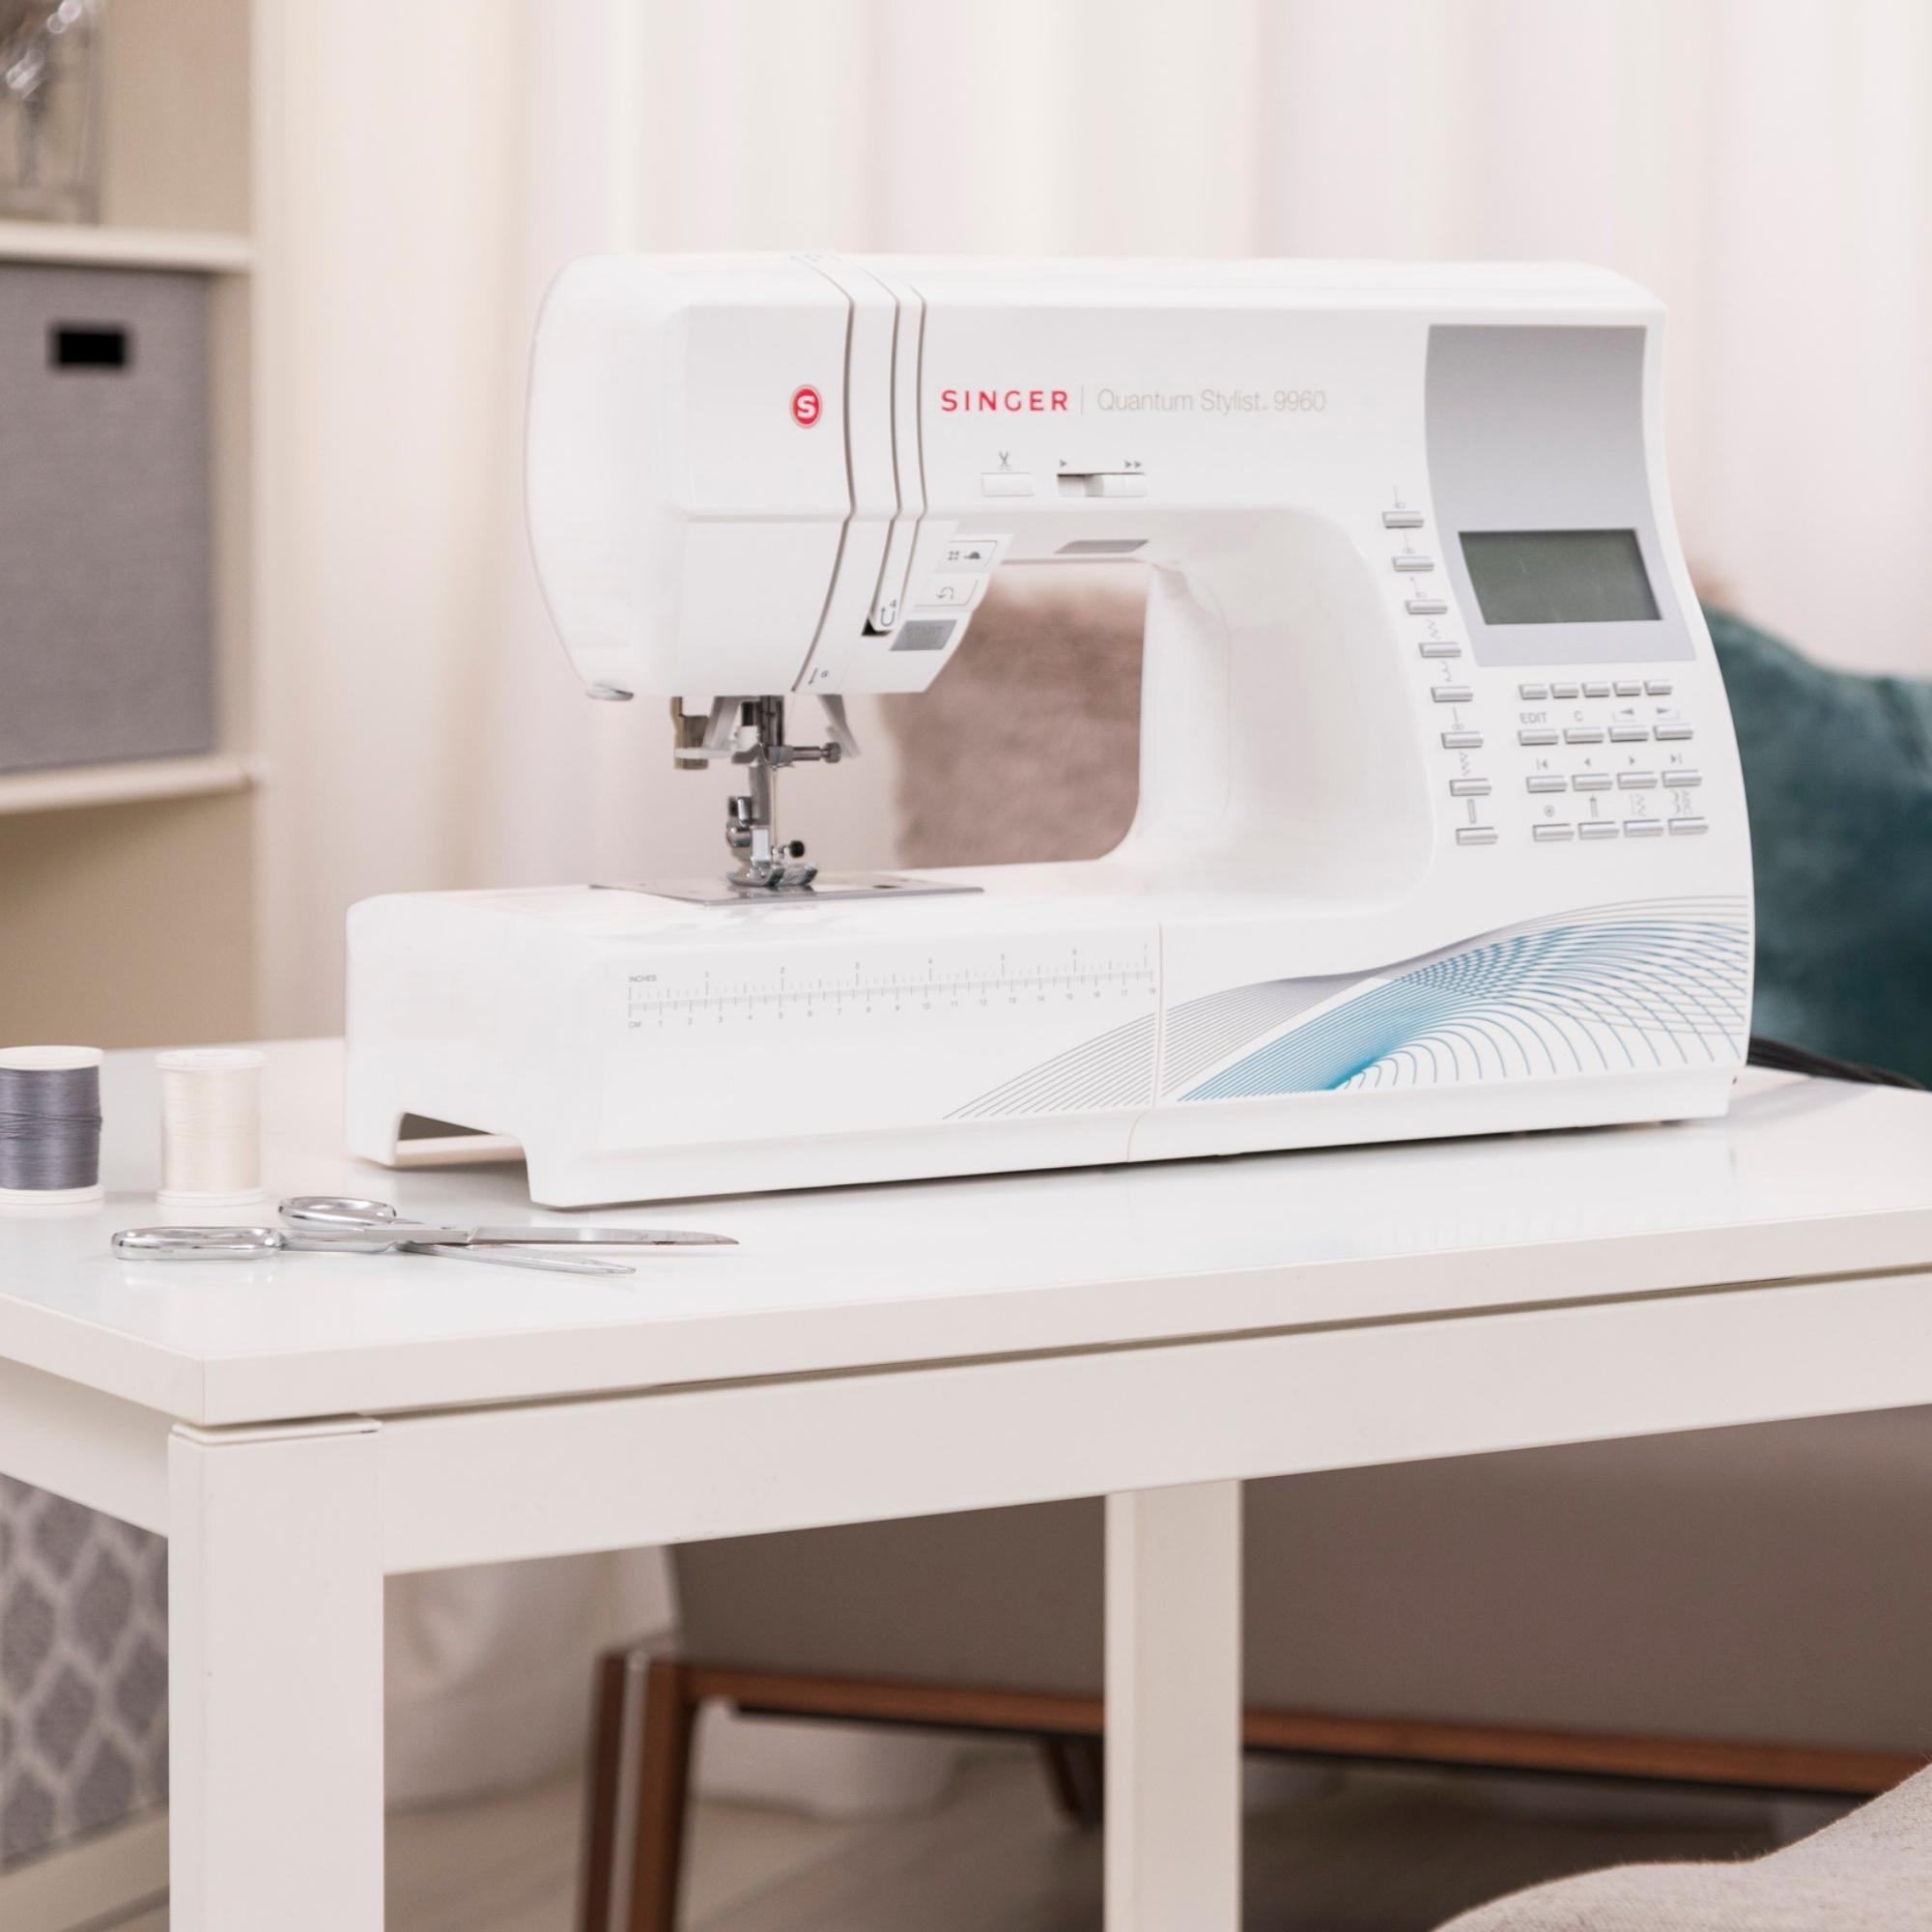 Singer® 9960 Quantum Stylist™ Computerized Sewing Machine With Accessory Kit, Extension Table - 600 Stitches & Electronic Auto Pilot Mode - image 3 of 12